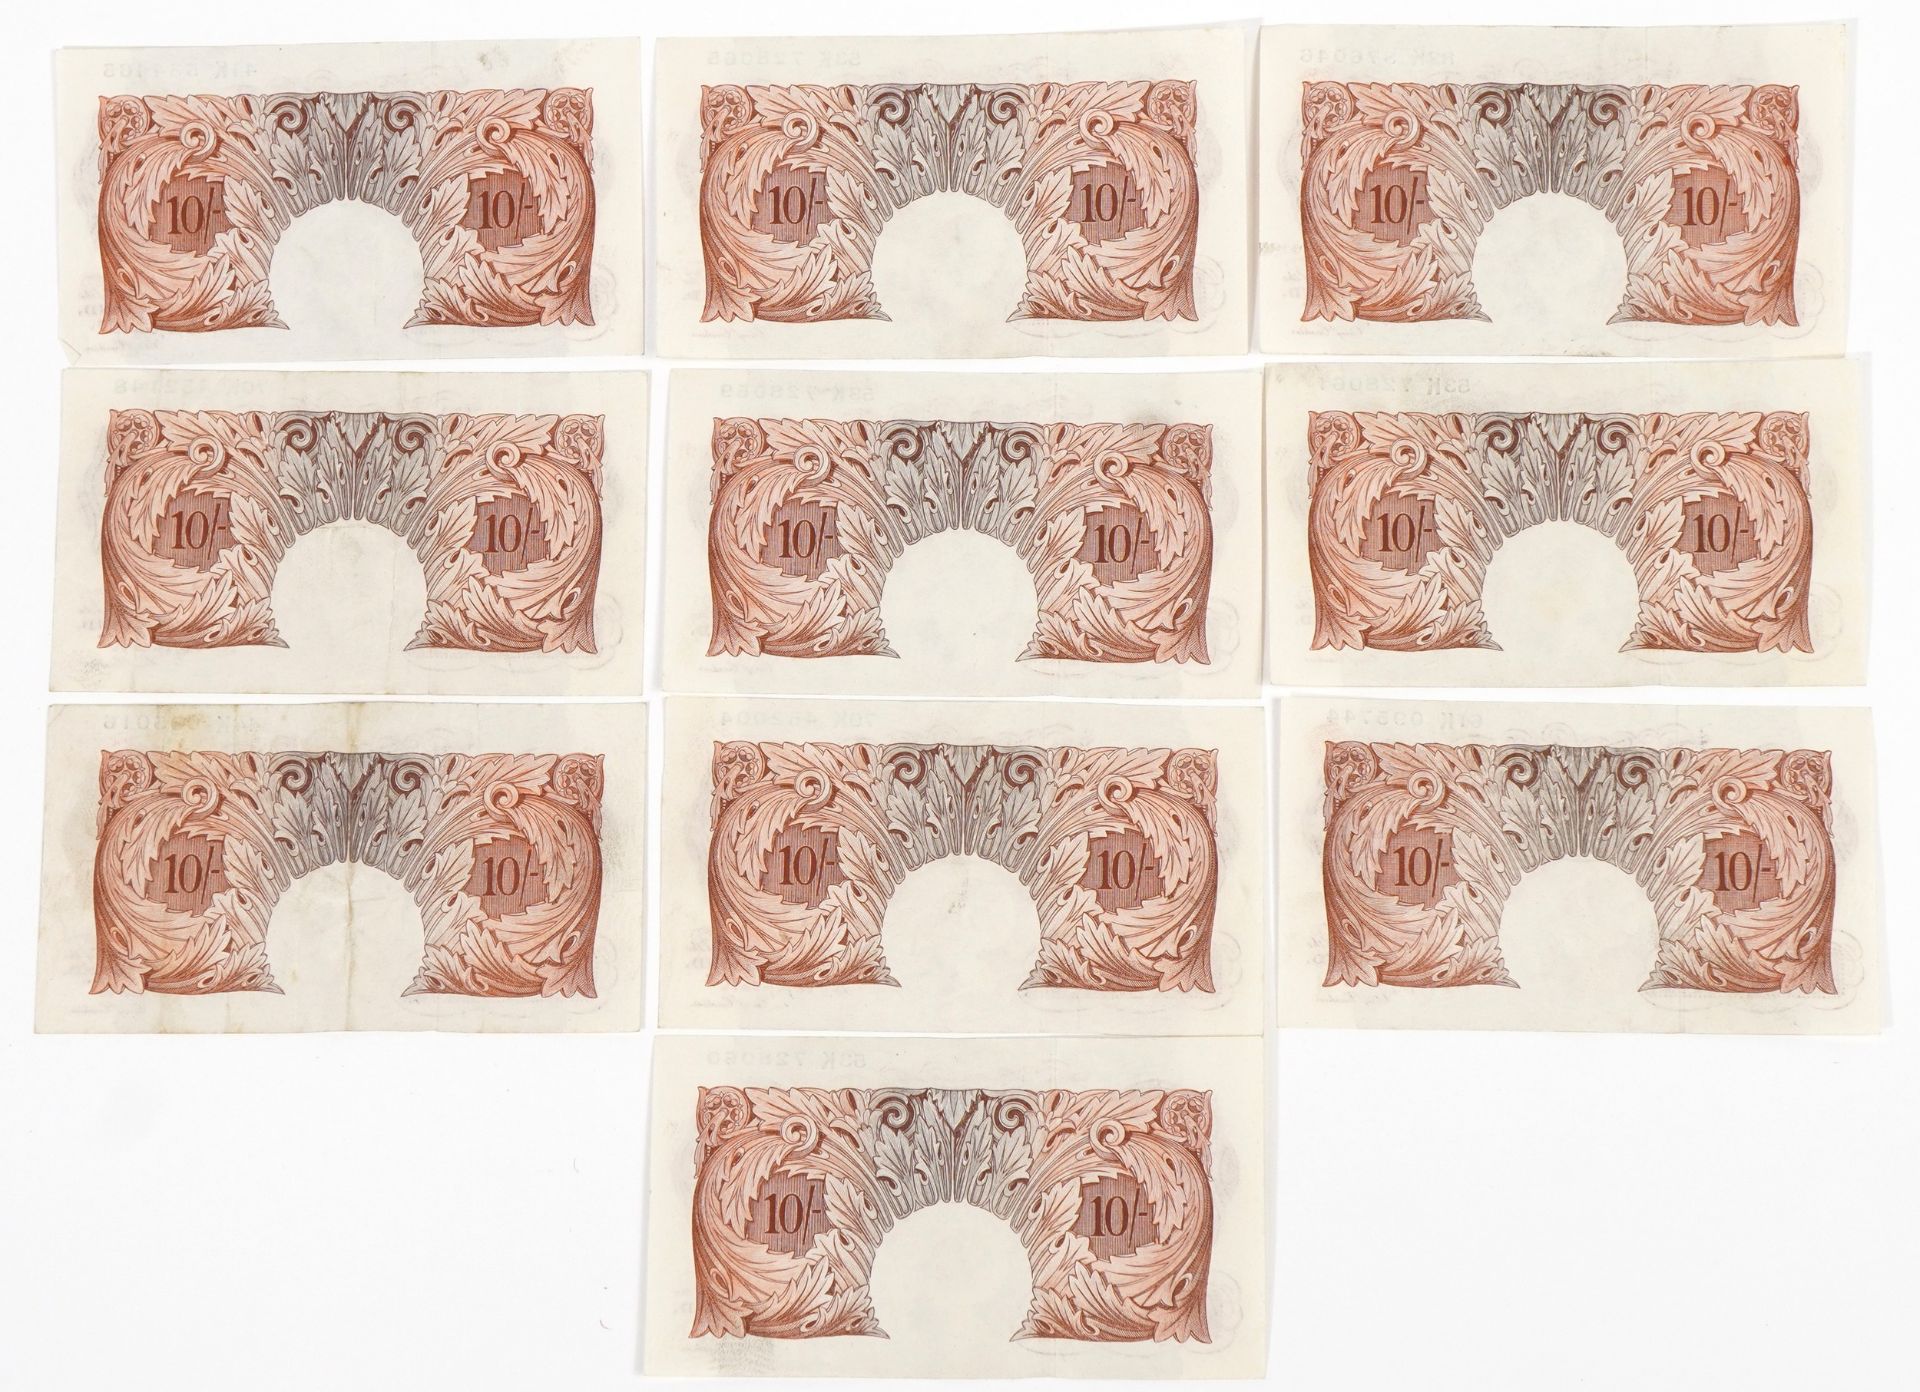 Ten Bank of England ten shilling notes, each Chief Cashier K O Peppiatt, various serial numbers - Image 3 of 3